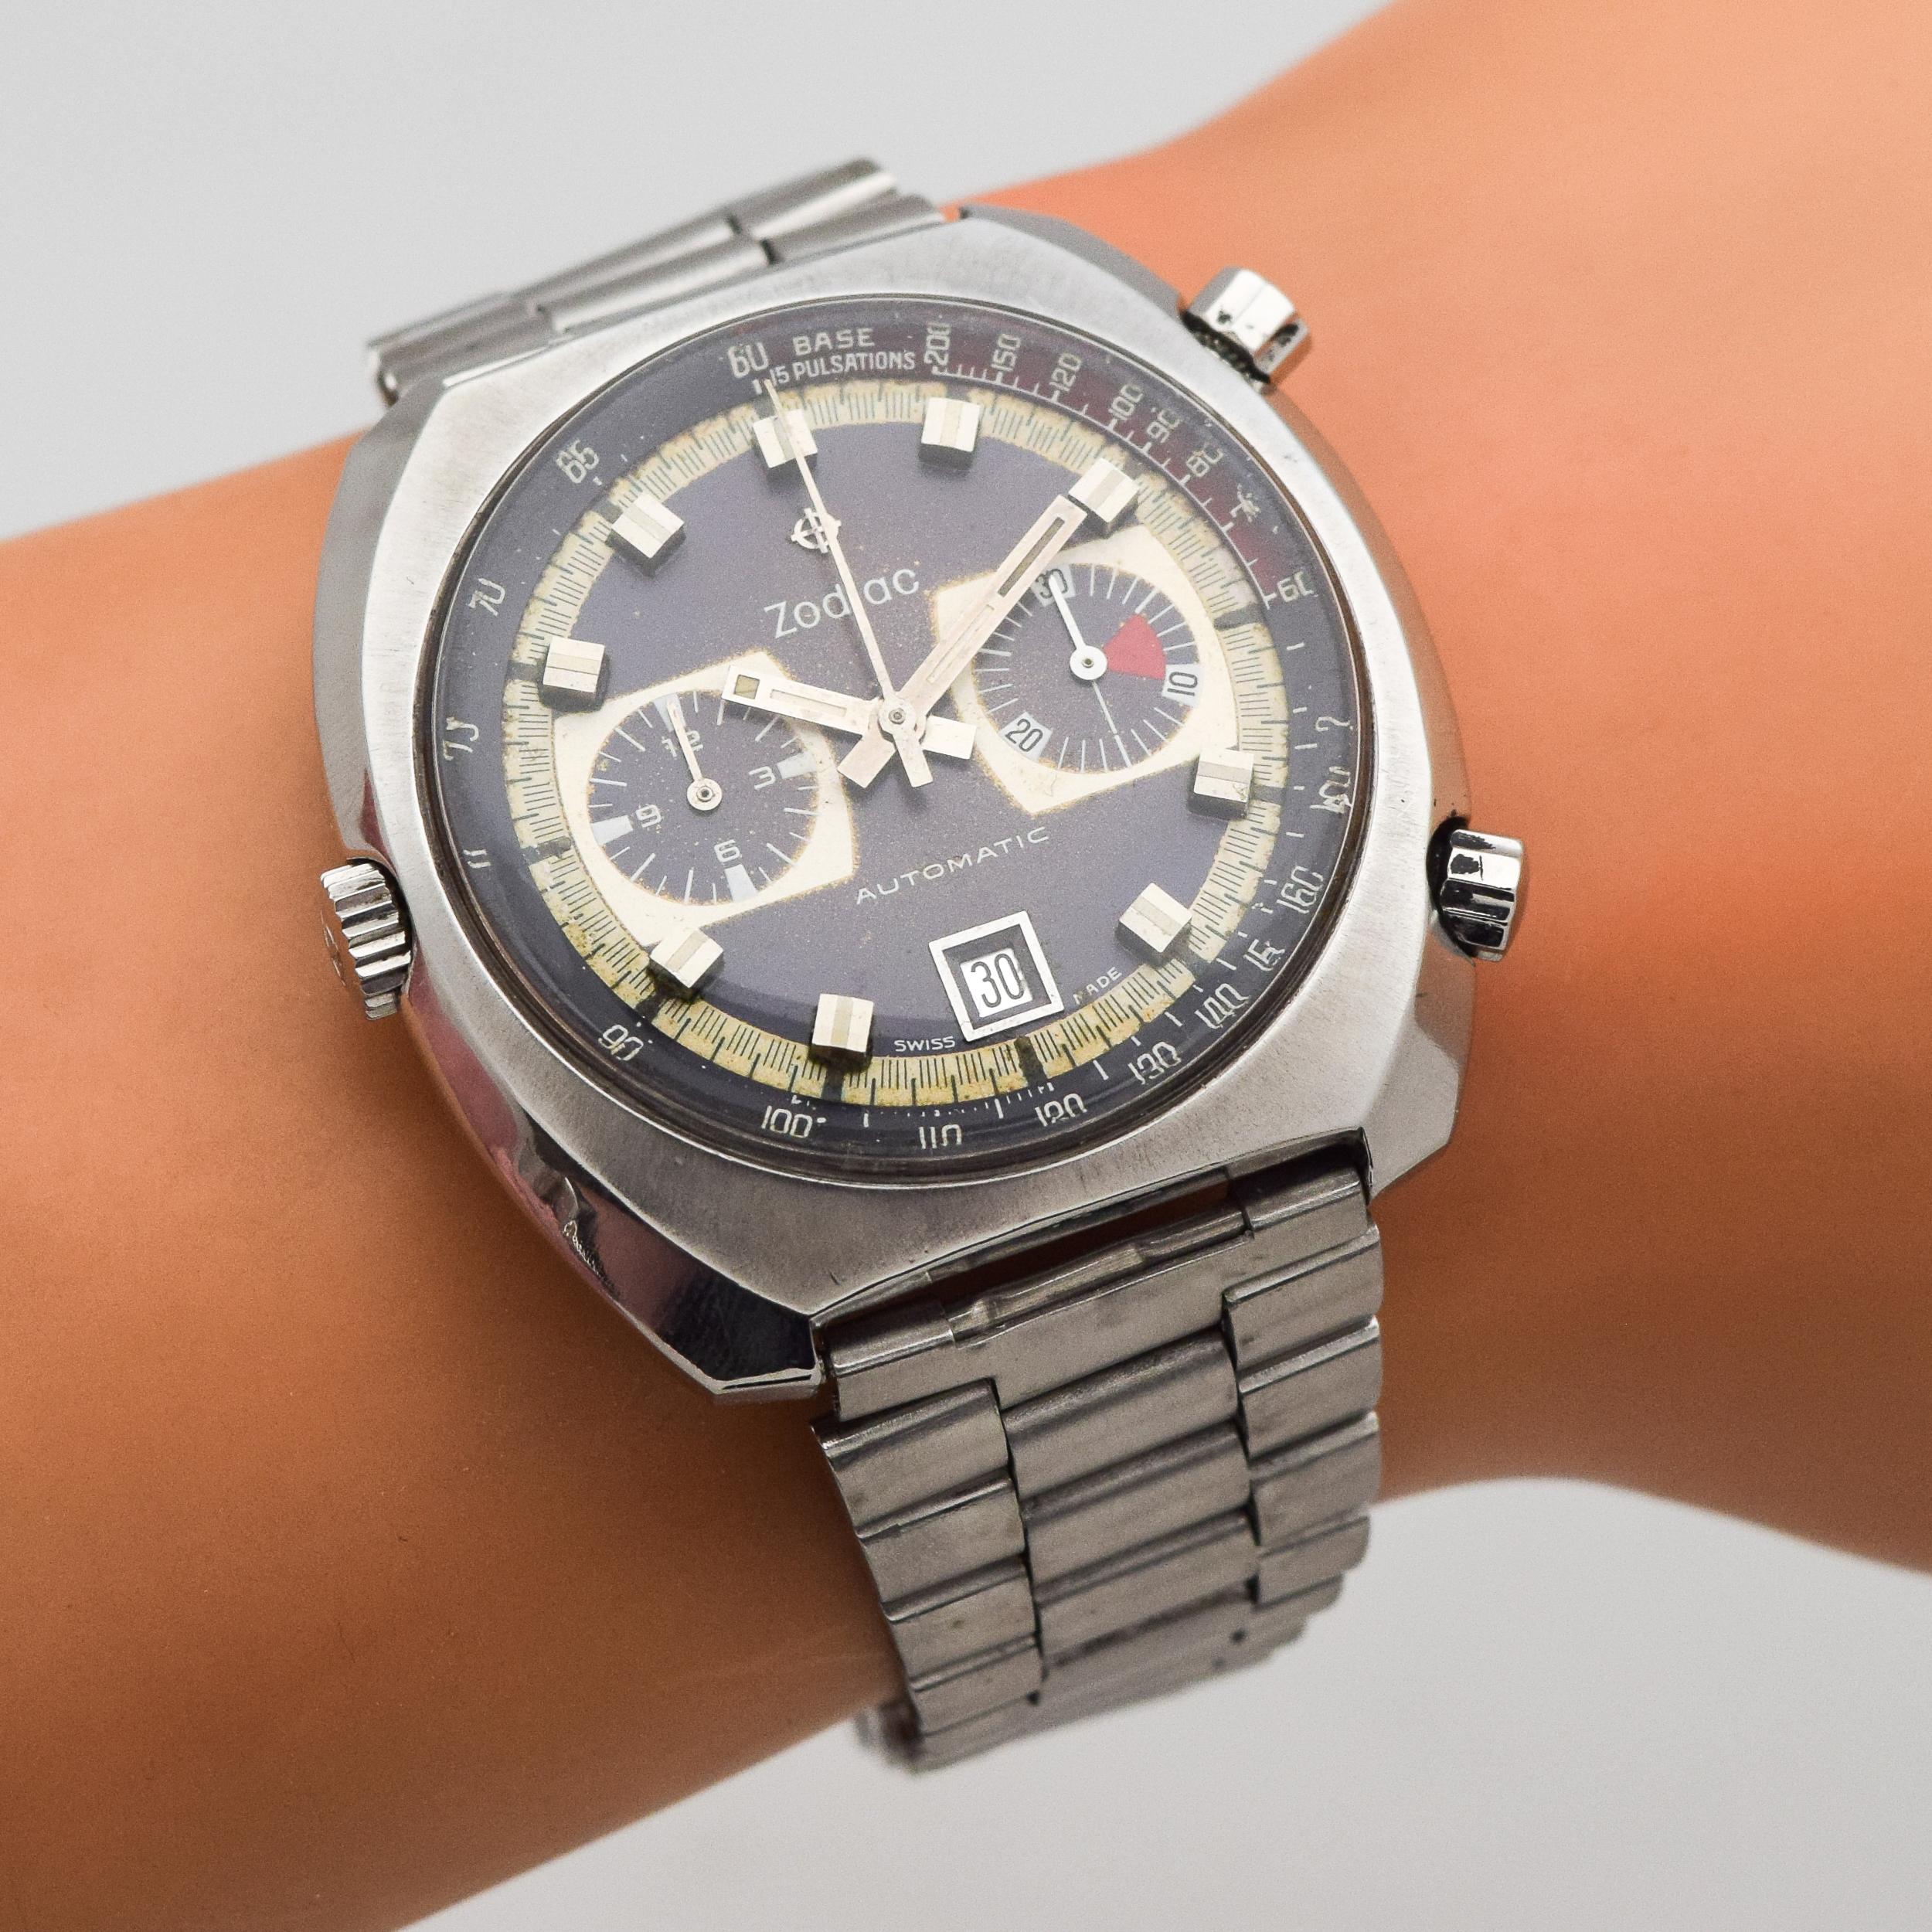 Vintage Zodiac 2-Register Chronograph in Stainless Steel, 1970s For Sale 2